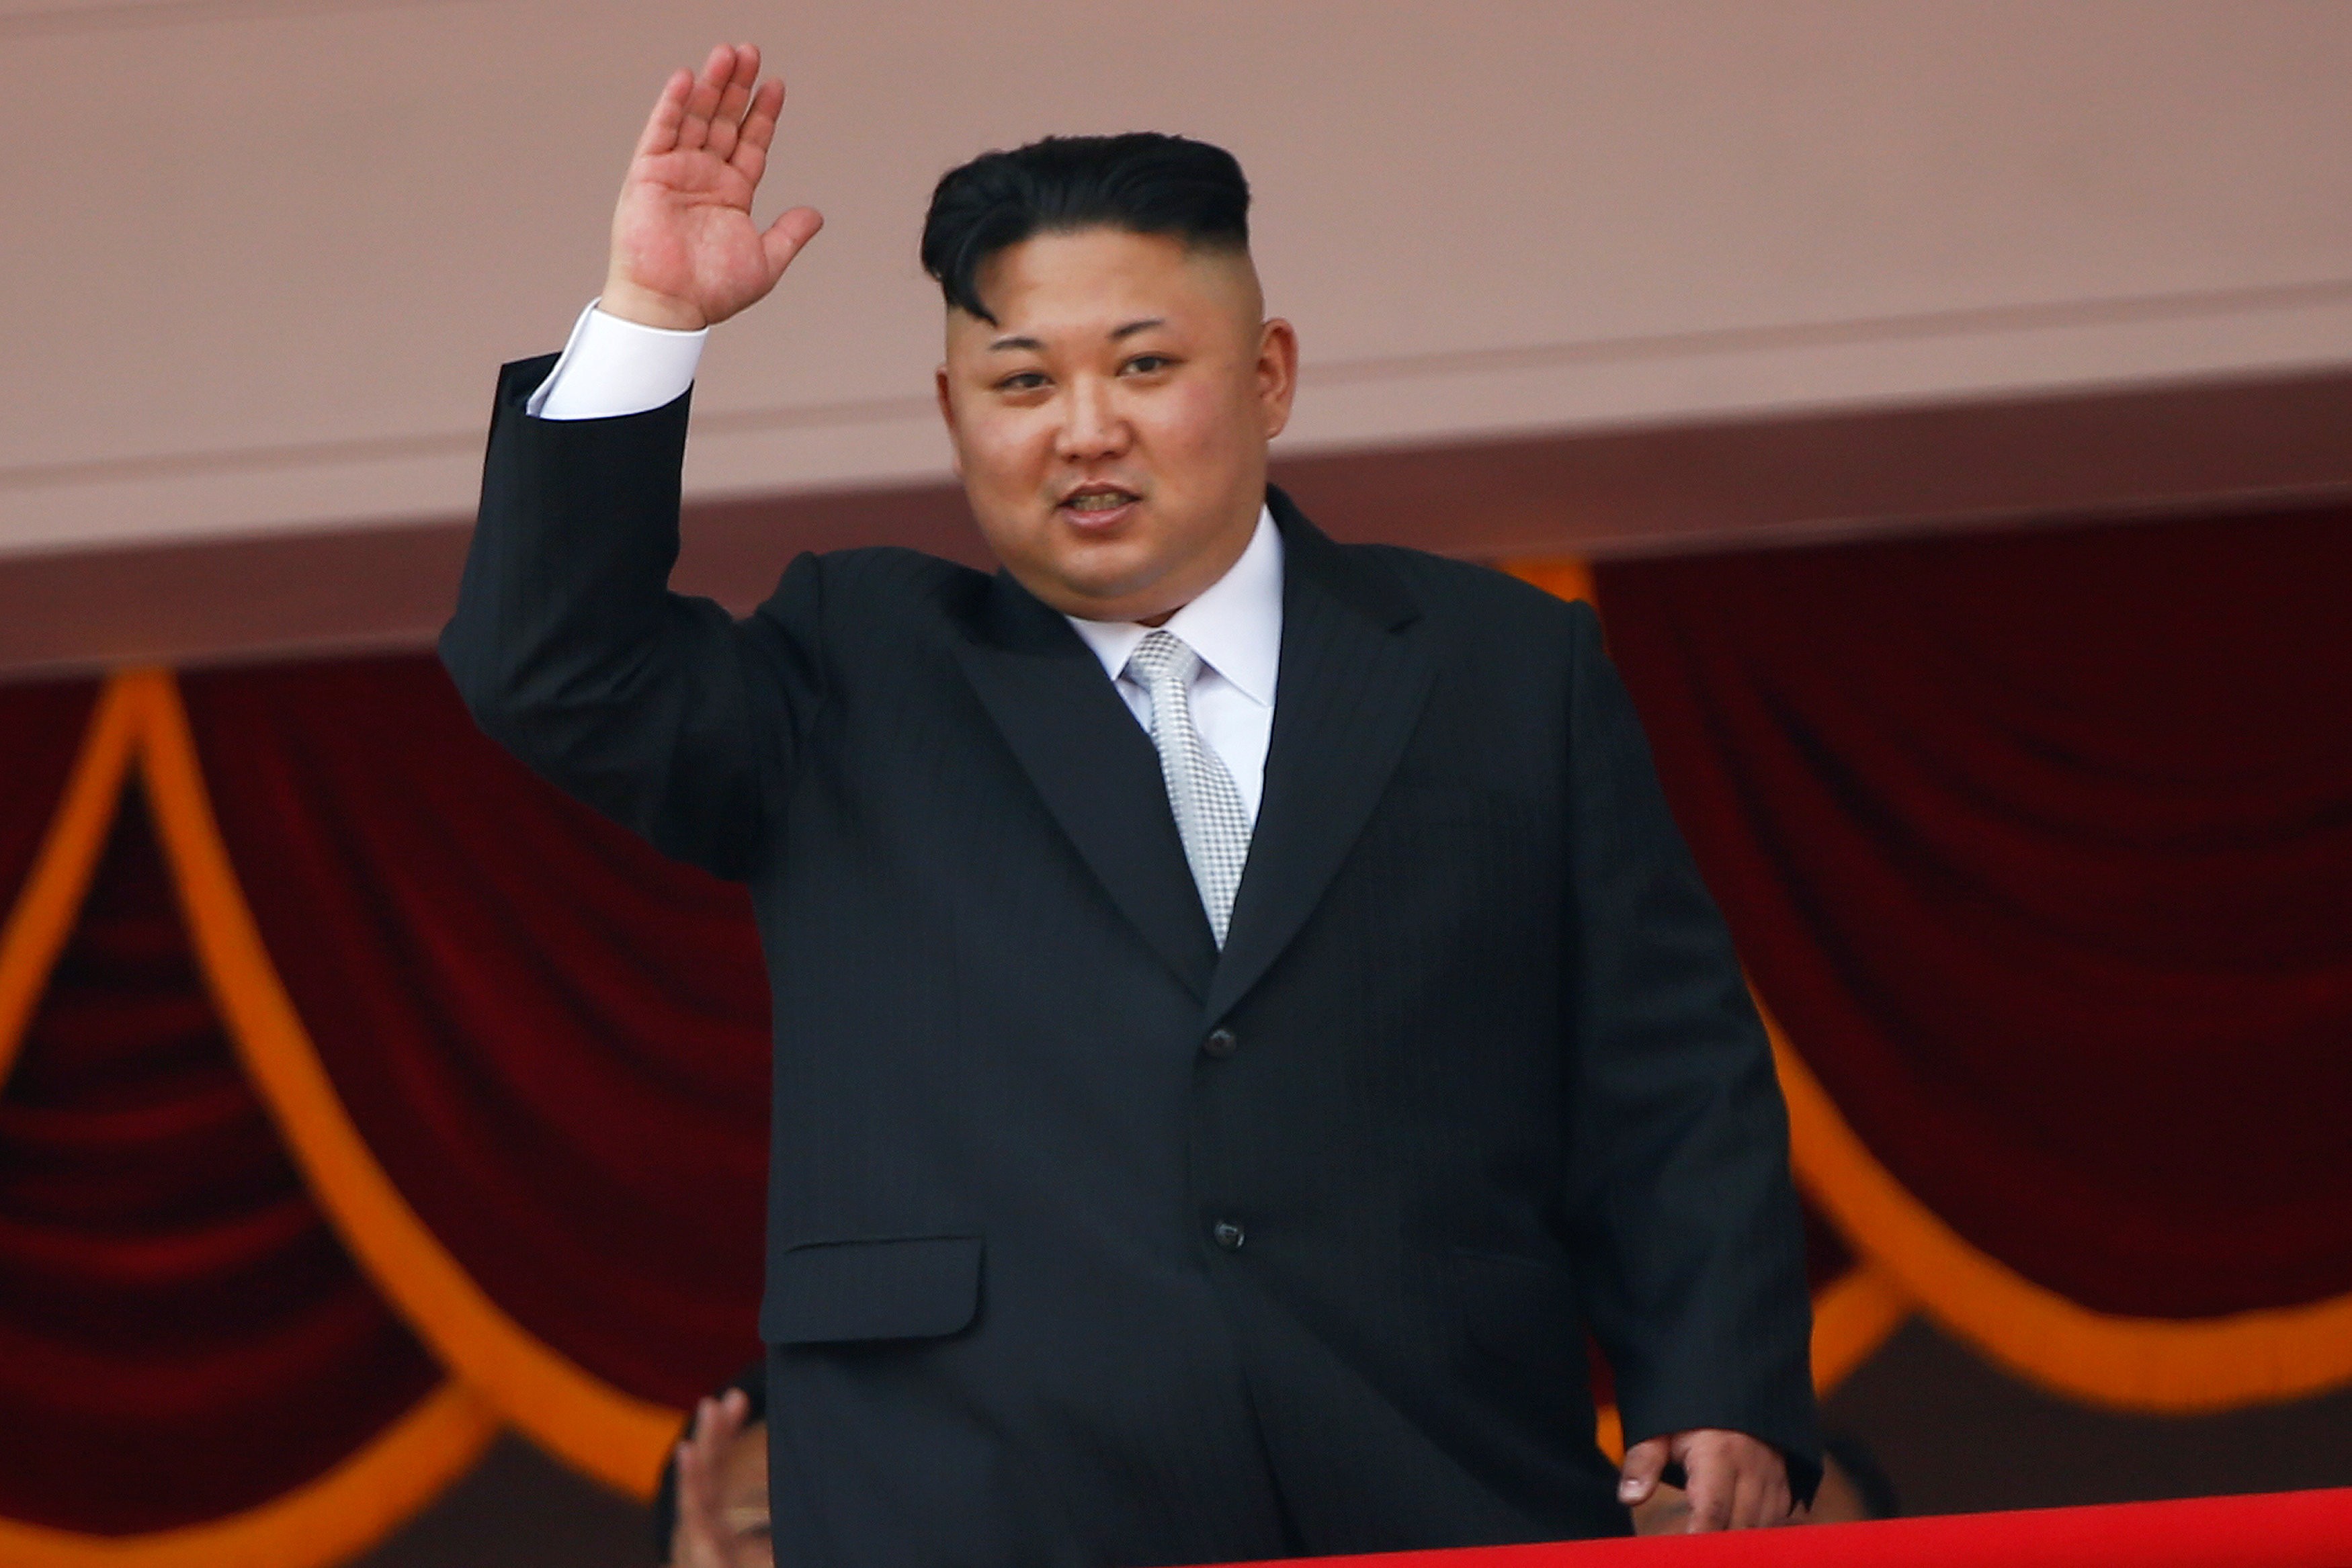 North Korean leader Kim Jong-un waves to people attending a military parade marking the 105th birthday of the country’s founding father, Kim Il-sung, in Pyongyang on April 15. Photo: Reuters